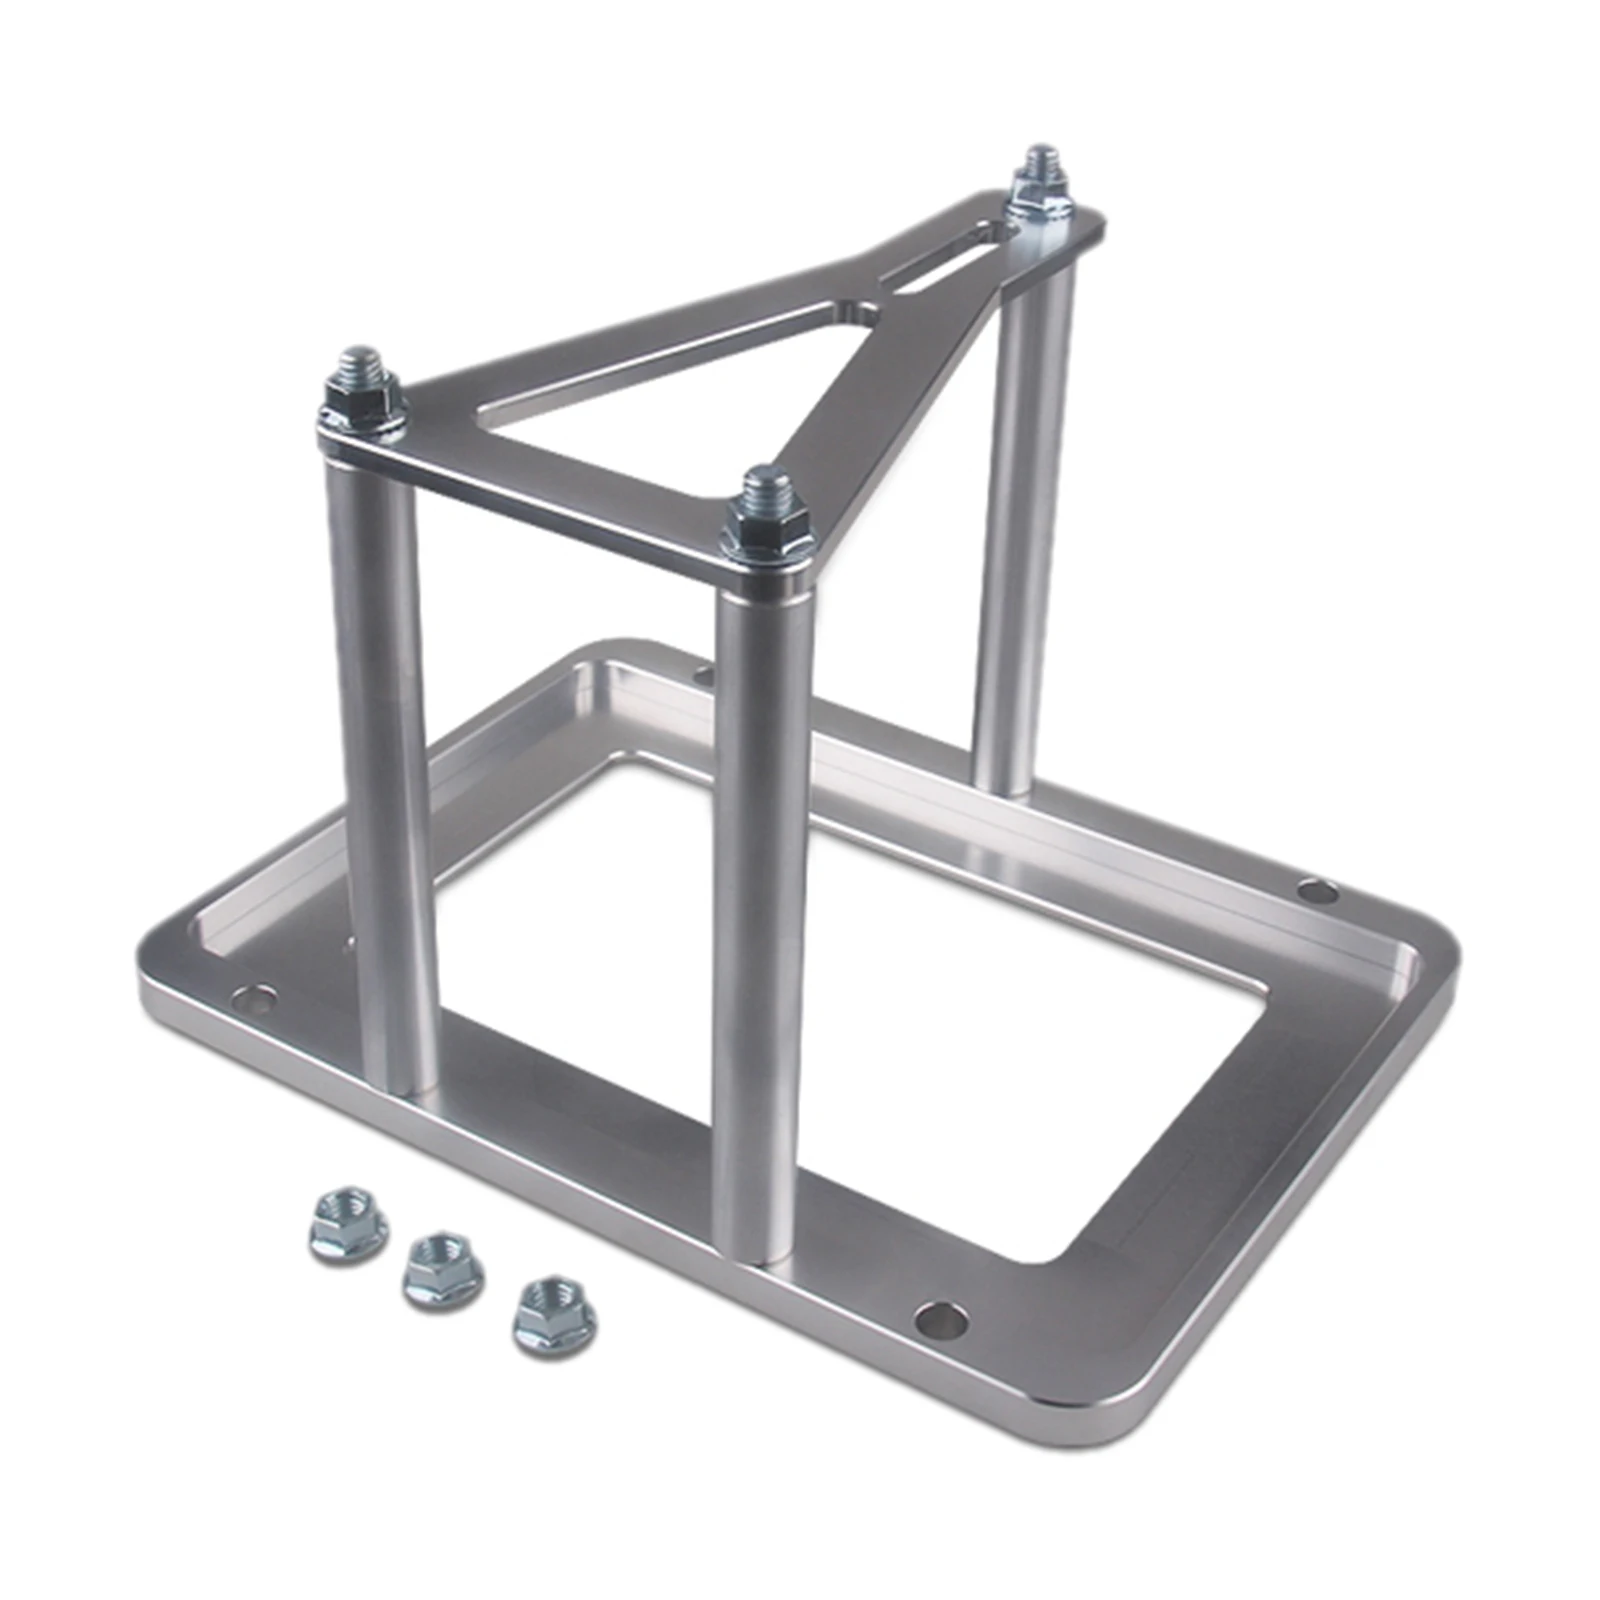 Billet Battery Tray Hold Down Relocation Box for Optima Race Racing Mount Universal Made from billet aluminum